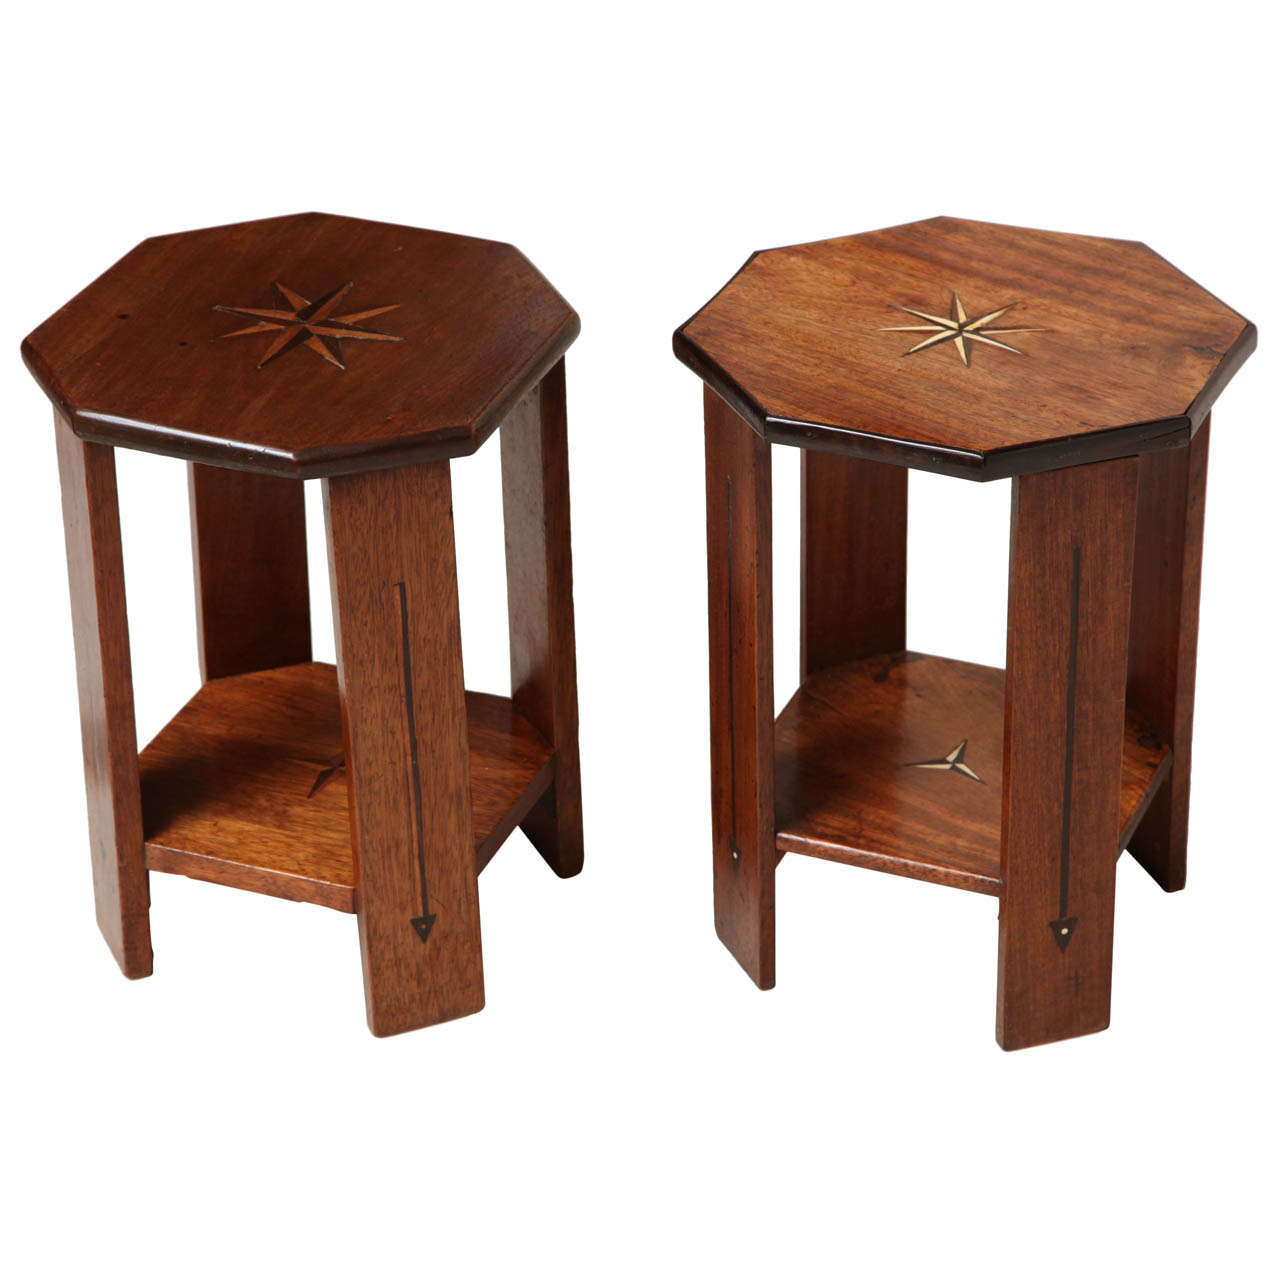 Near Pair of Inlaid Indian Octagonal Tables